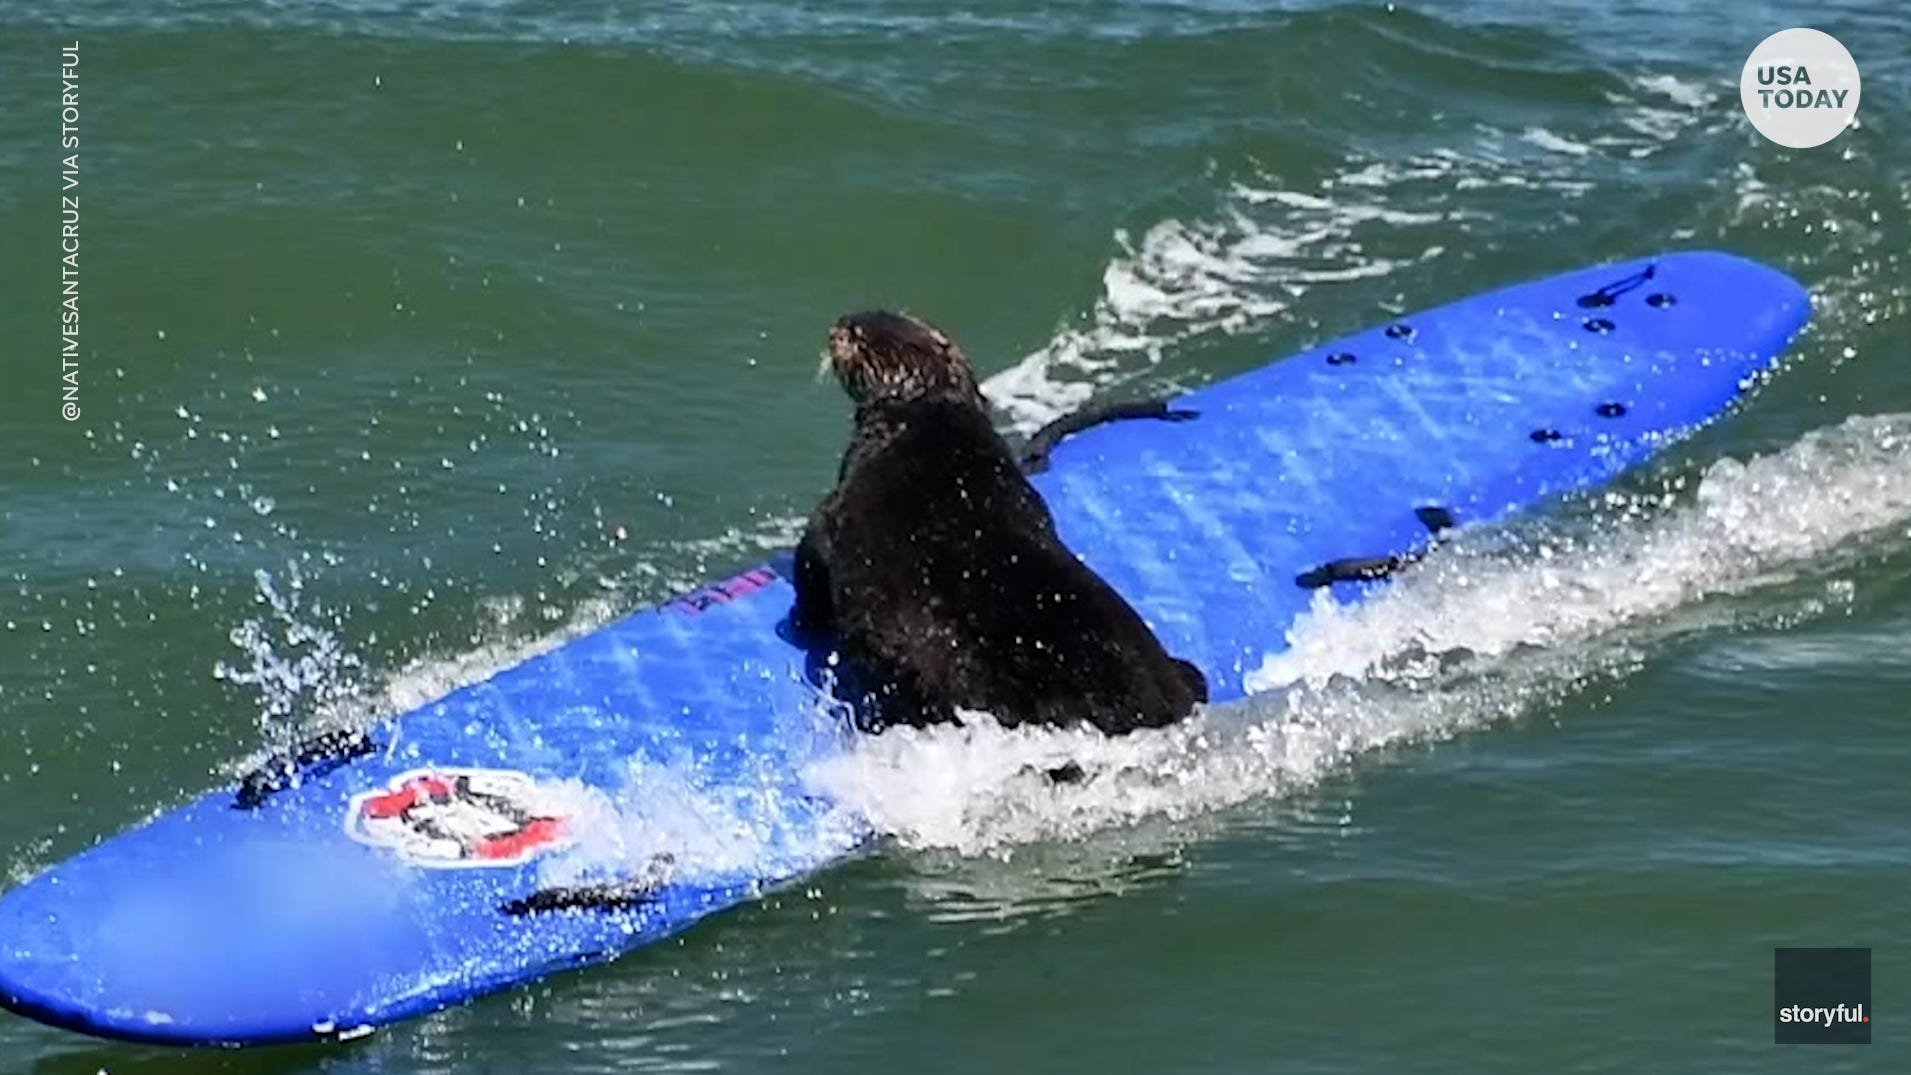 Surfboard-stealing Otter 841 keeps outsmarting California authorities trying to catch her